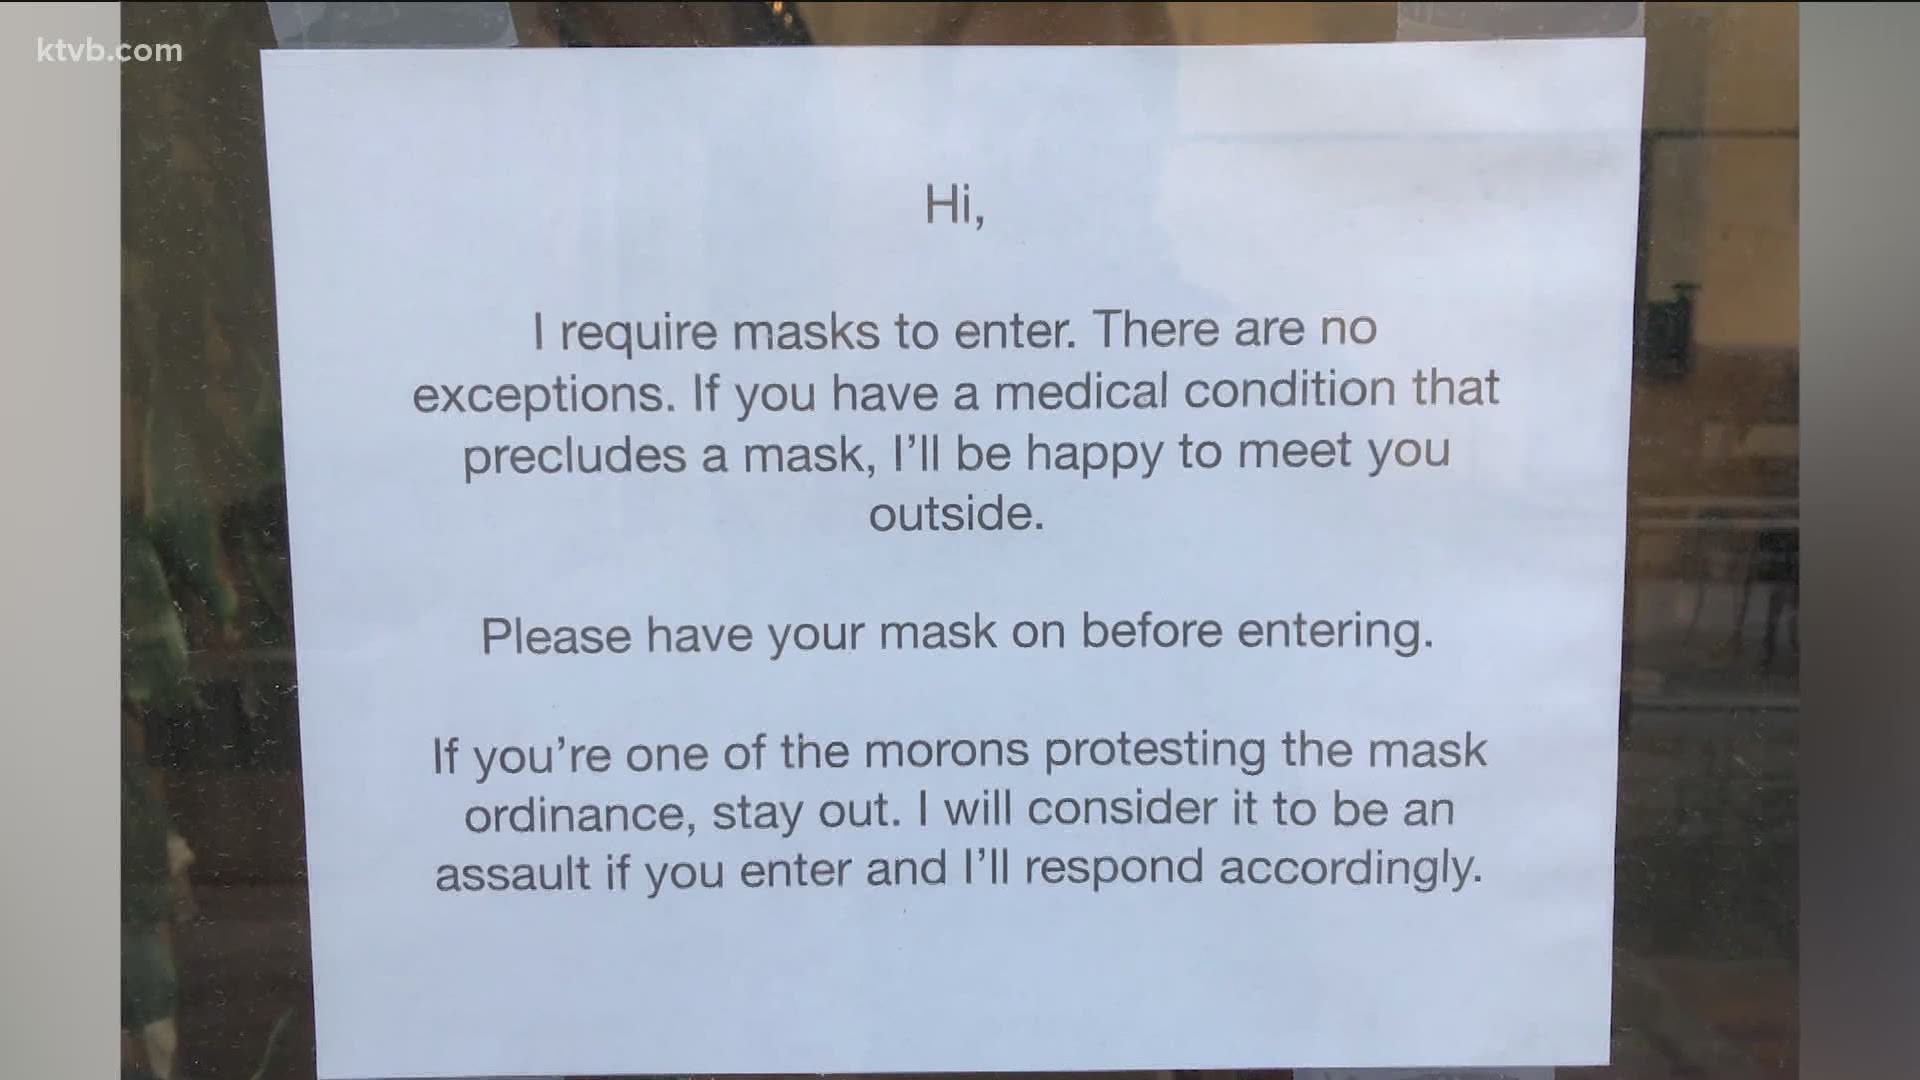 Mike Rogers makes custom jewelry in his shop Precious Metal Arts on 8th Street. He has a message for anti-maskers and its posted on the door to his store.